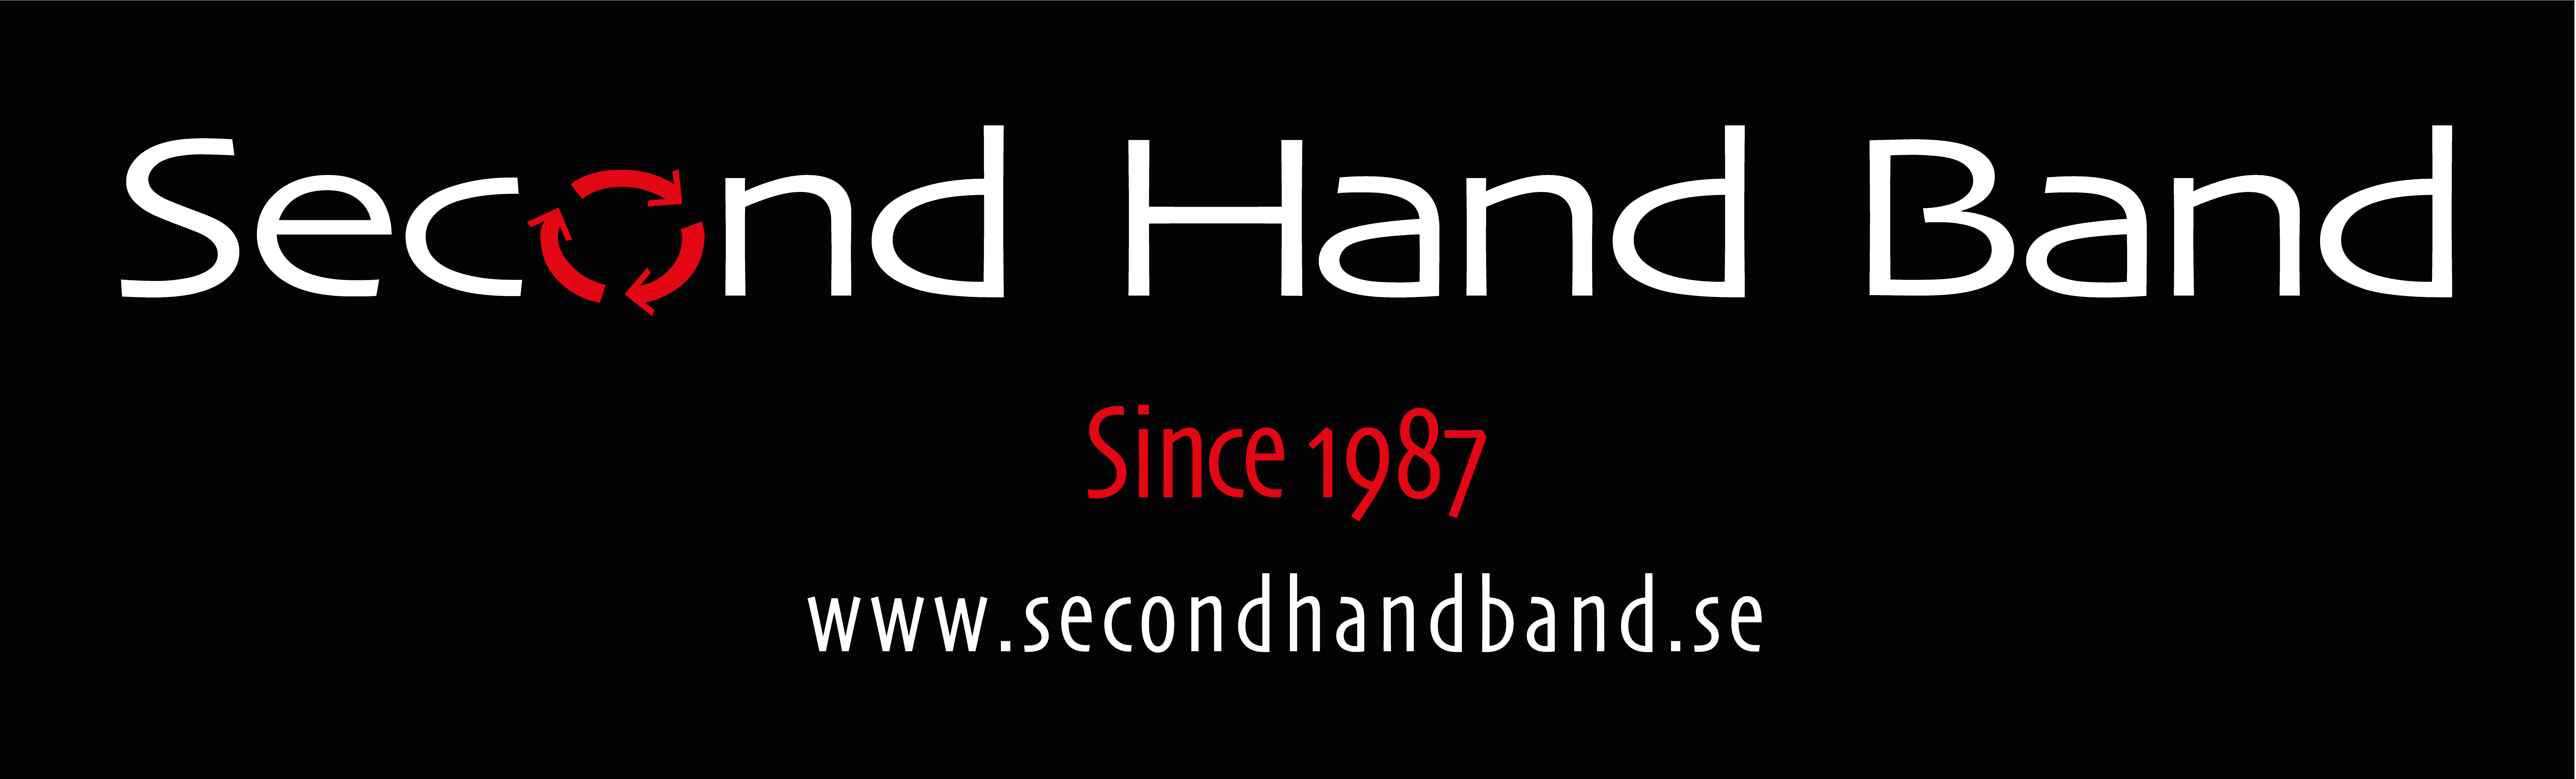 Second Hand Band